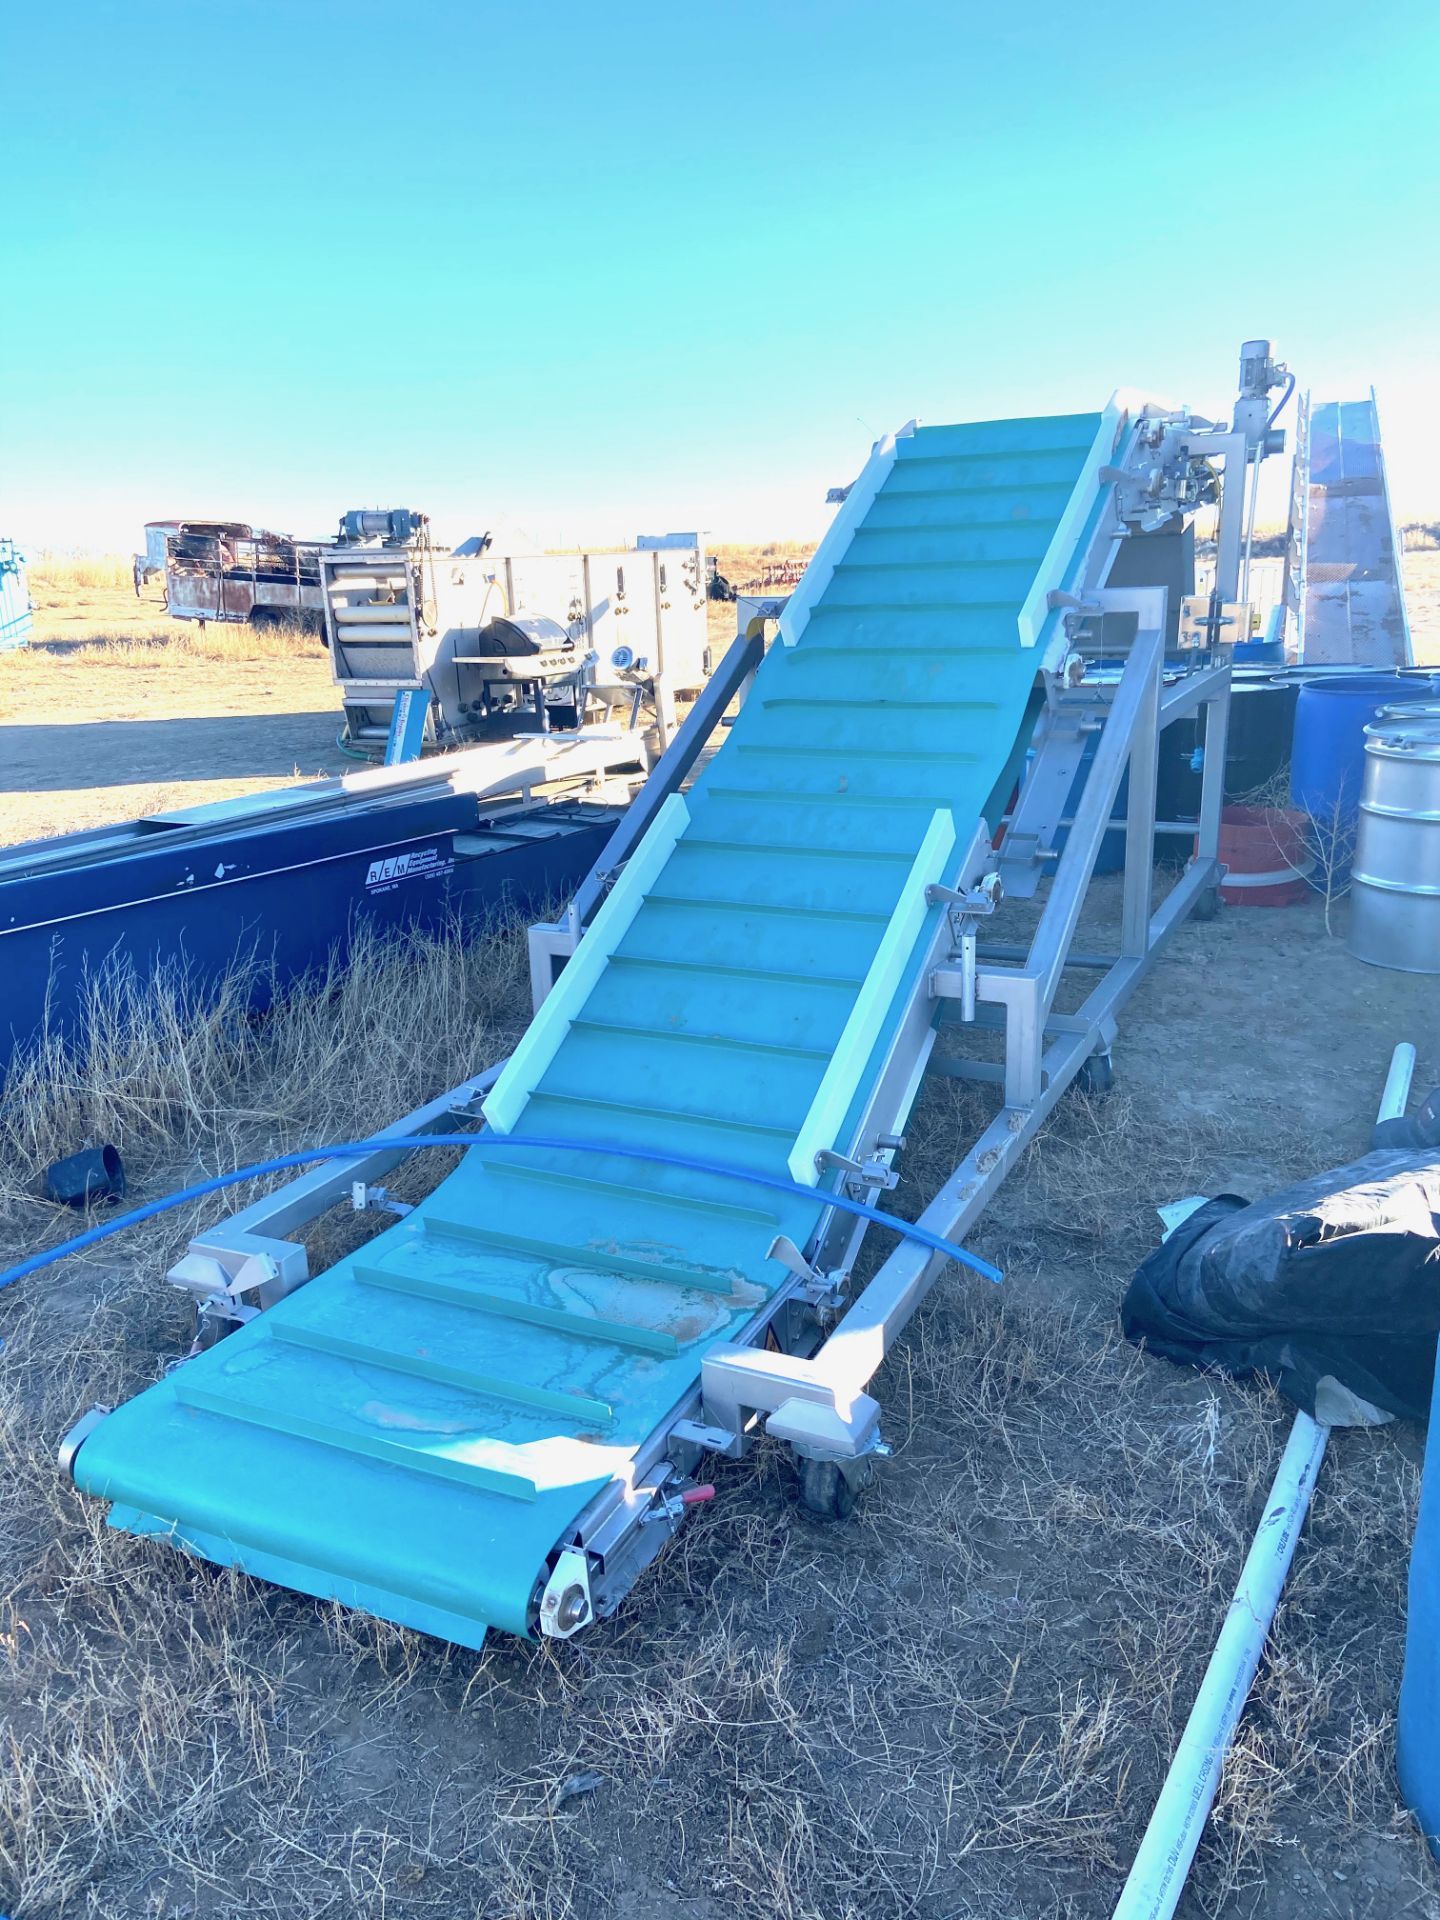 (Located in McClave, CO) Cleated Z Conveyor, 82” Tall x 19’ 6” Long x 60” Wide